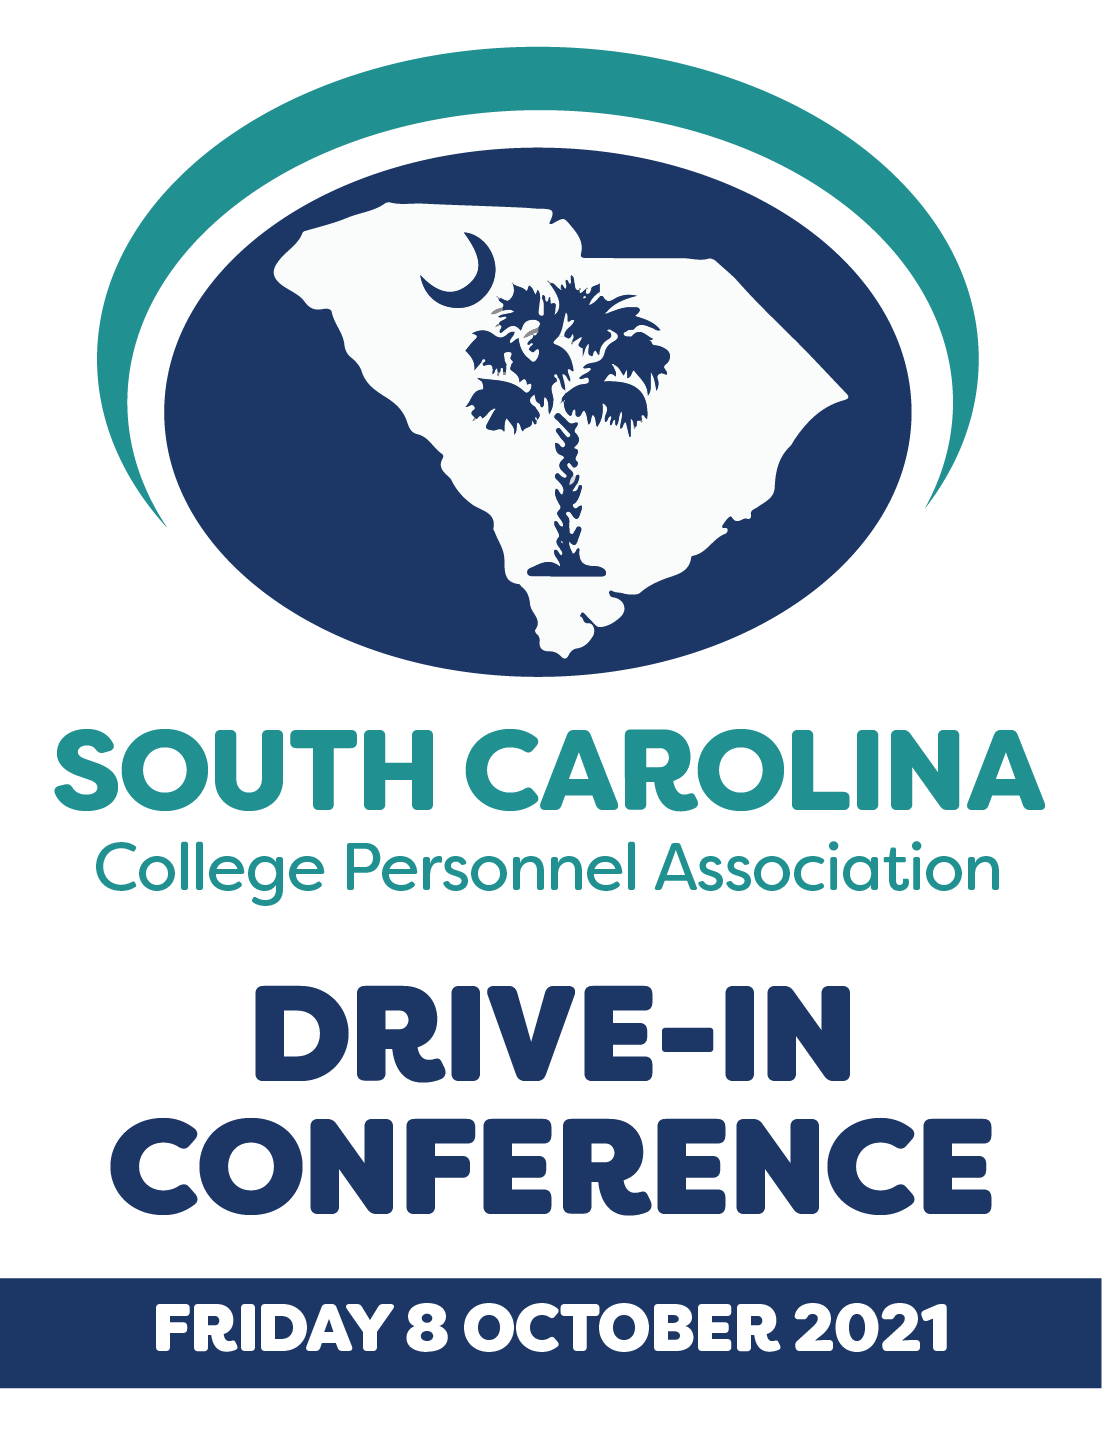 South Carolina College Personnel Association logo featuring a palm tree and crescent moon making up the South Carolina Flag. Additional text includes: Drive in Conference, Friday 8 October 2021